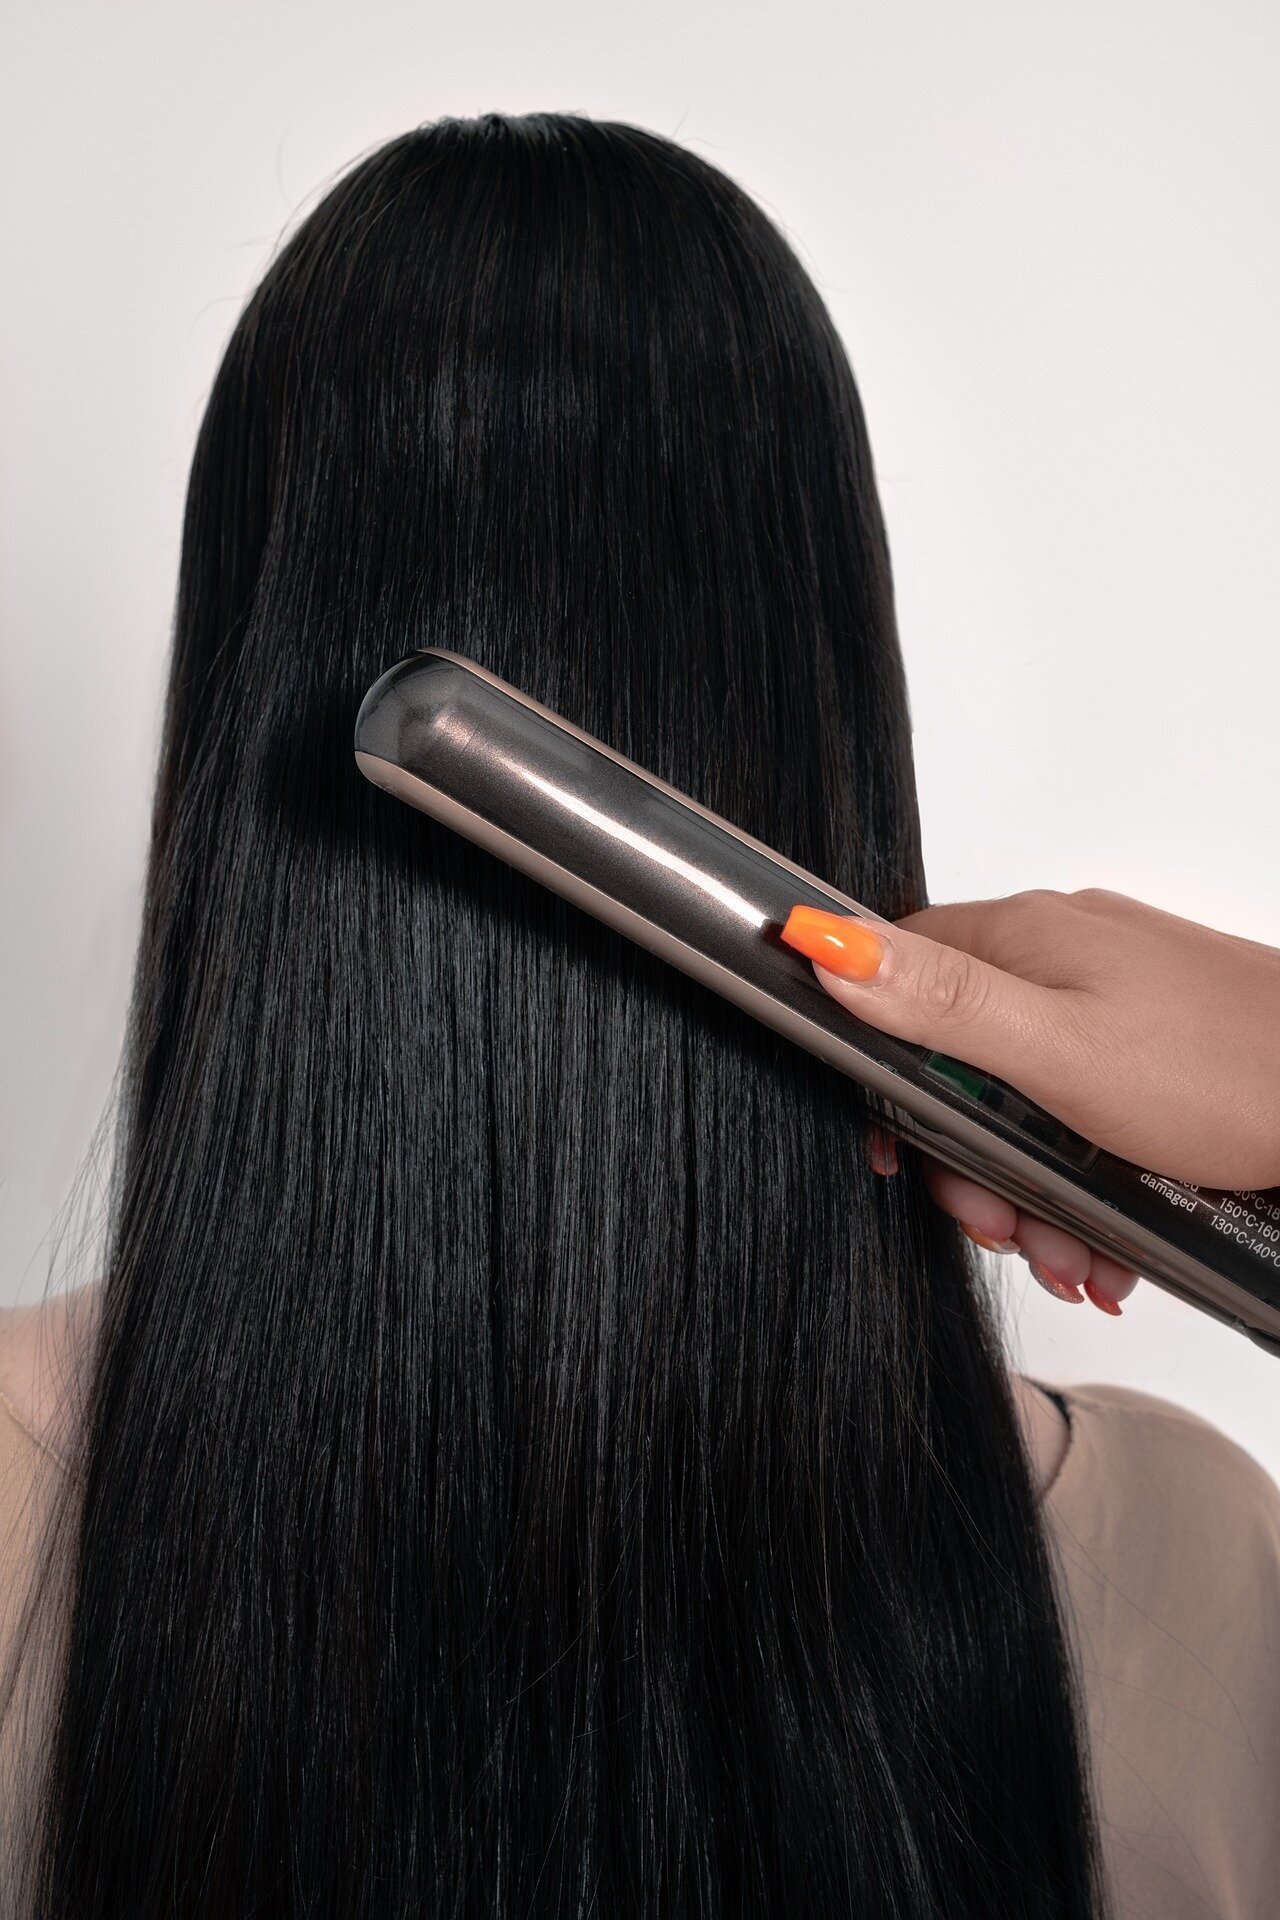 FDAs plan to ban hair relaxer chemical called too little too late